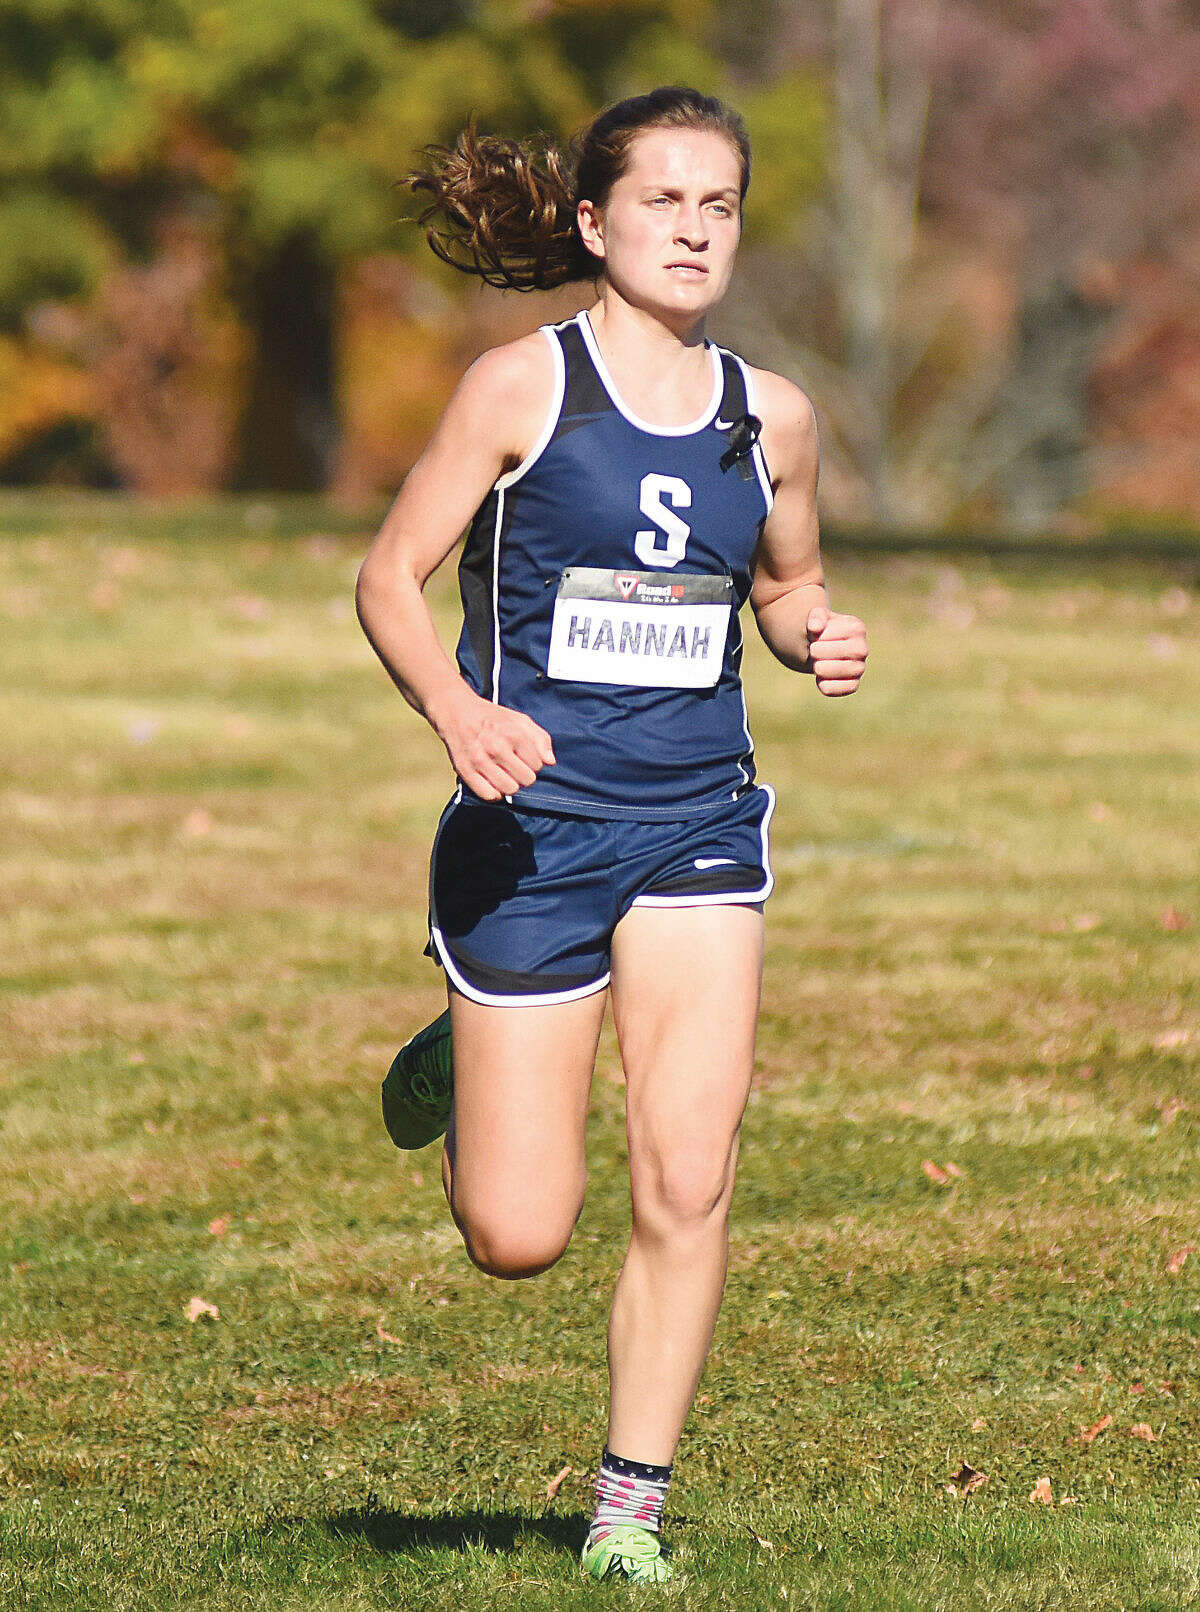 Hour photo/John Nash - Staples' Hannah DeBalsi runs along the course at Waveny Park in New Canaan on Wednesday, en route to her third straight FCIAC championship.